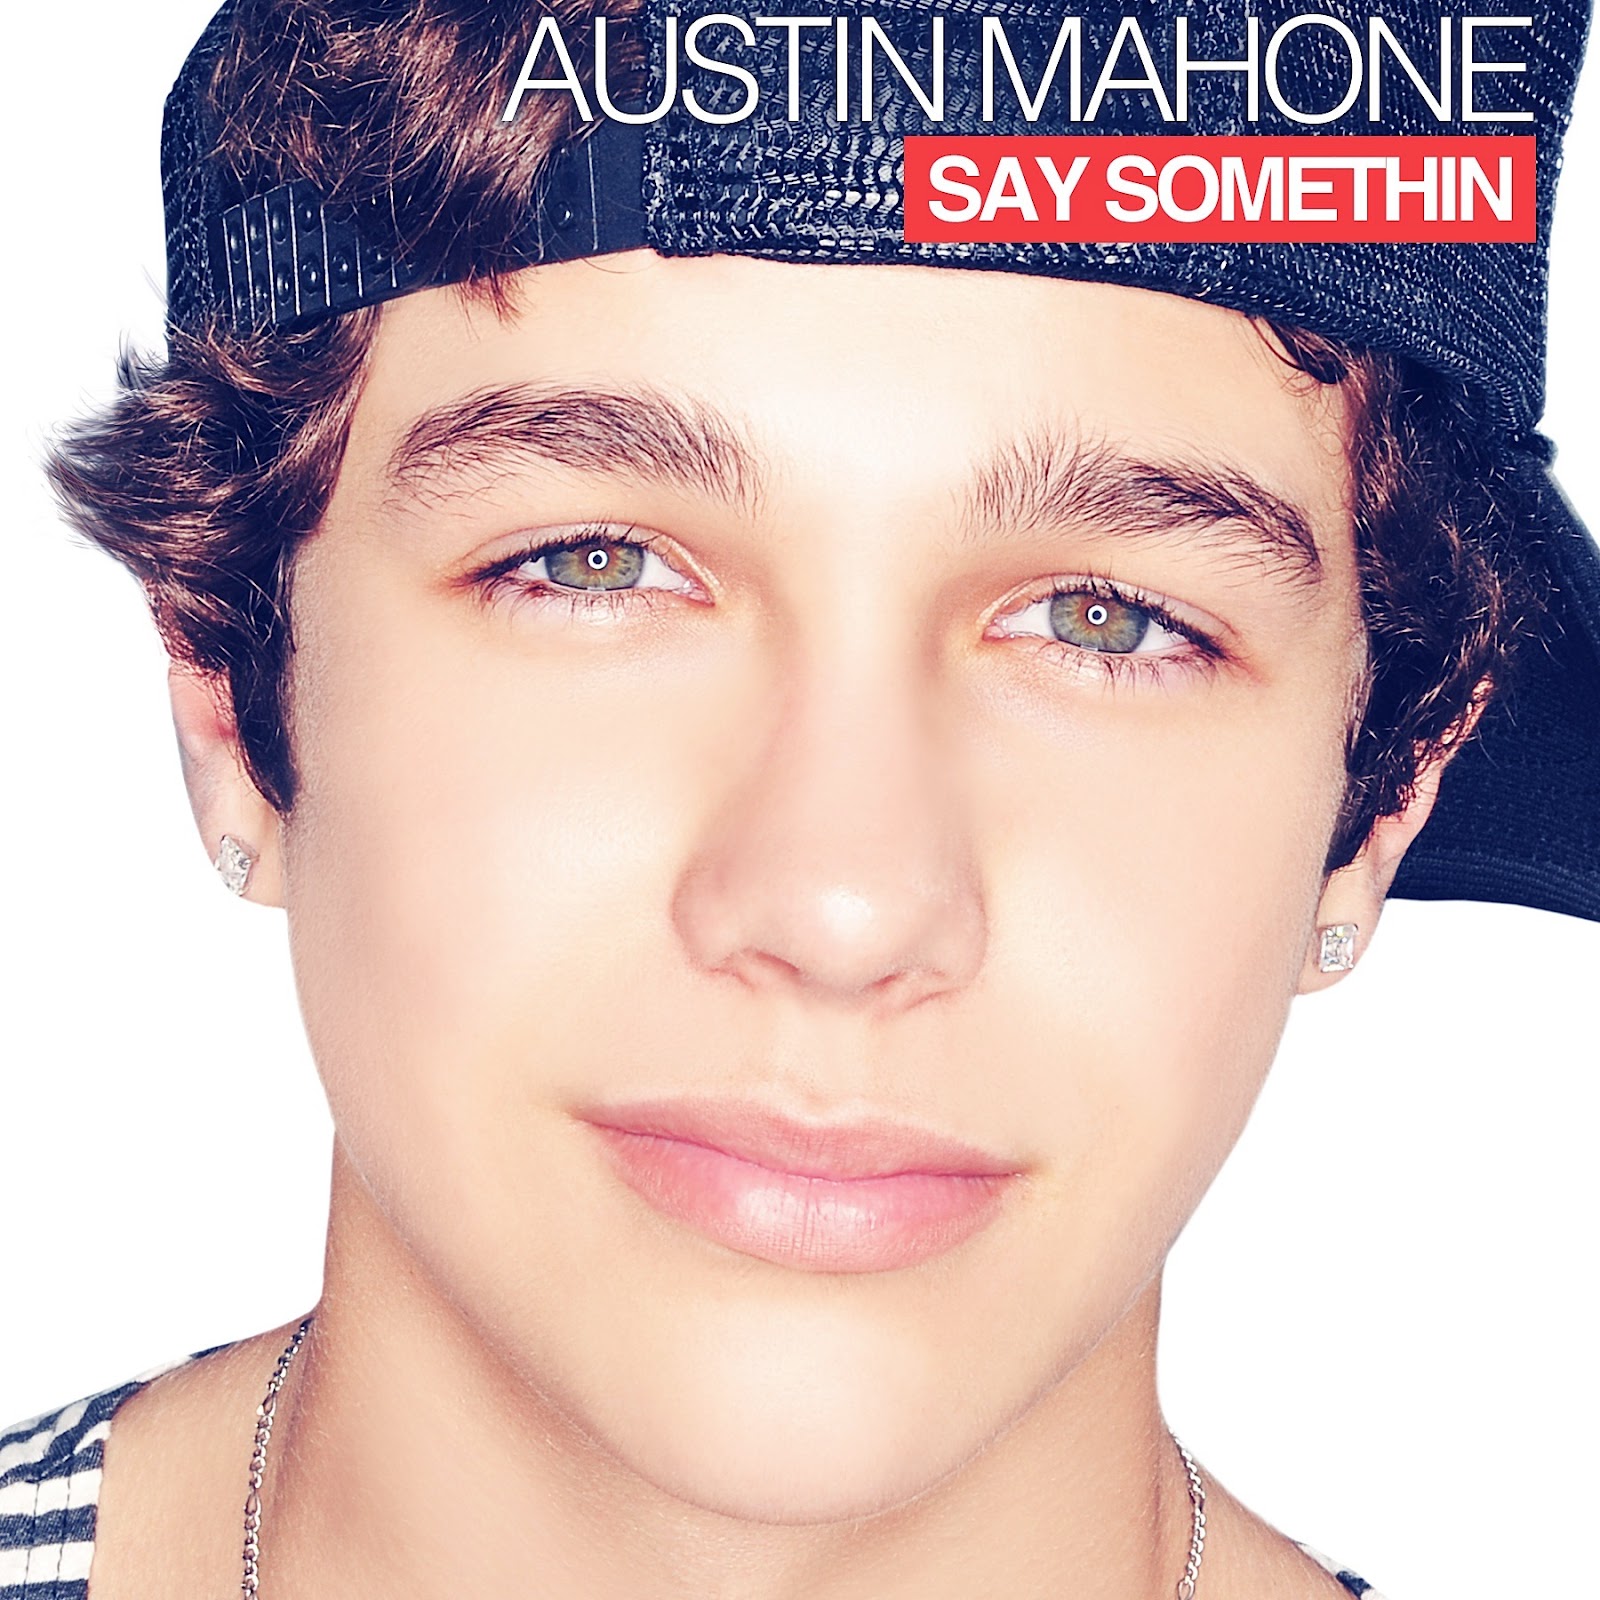 Mahone site austin fan Chat With